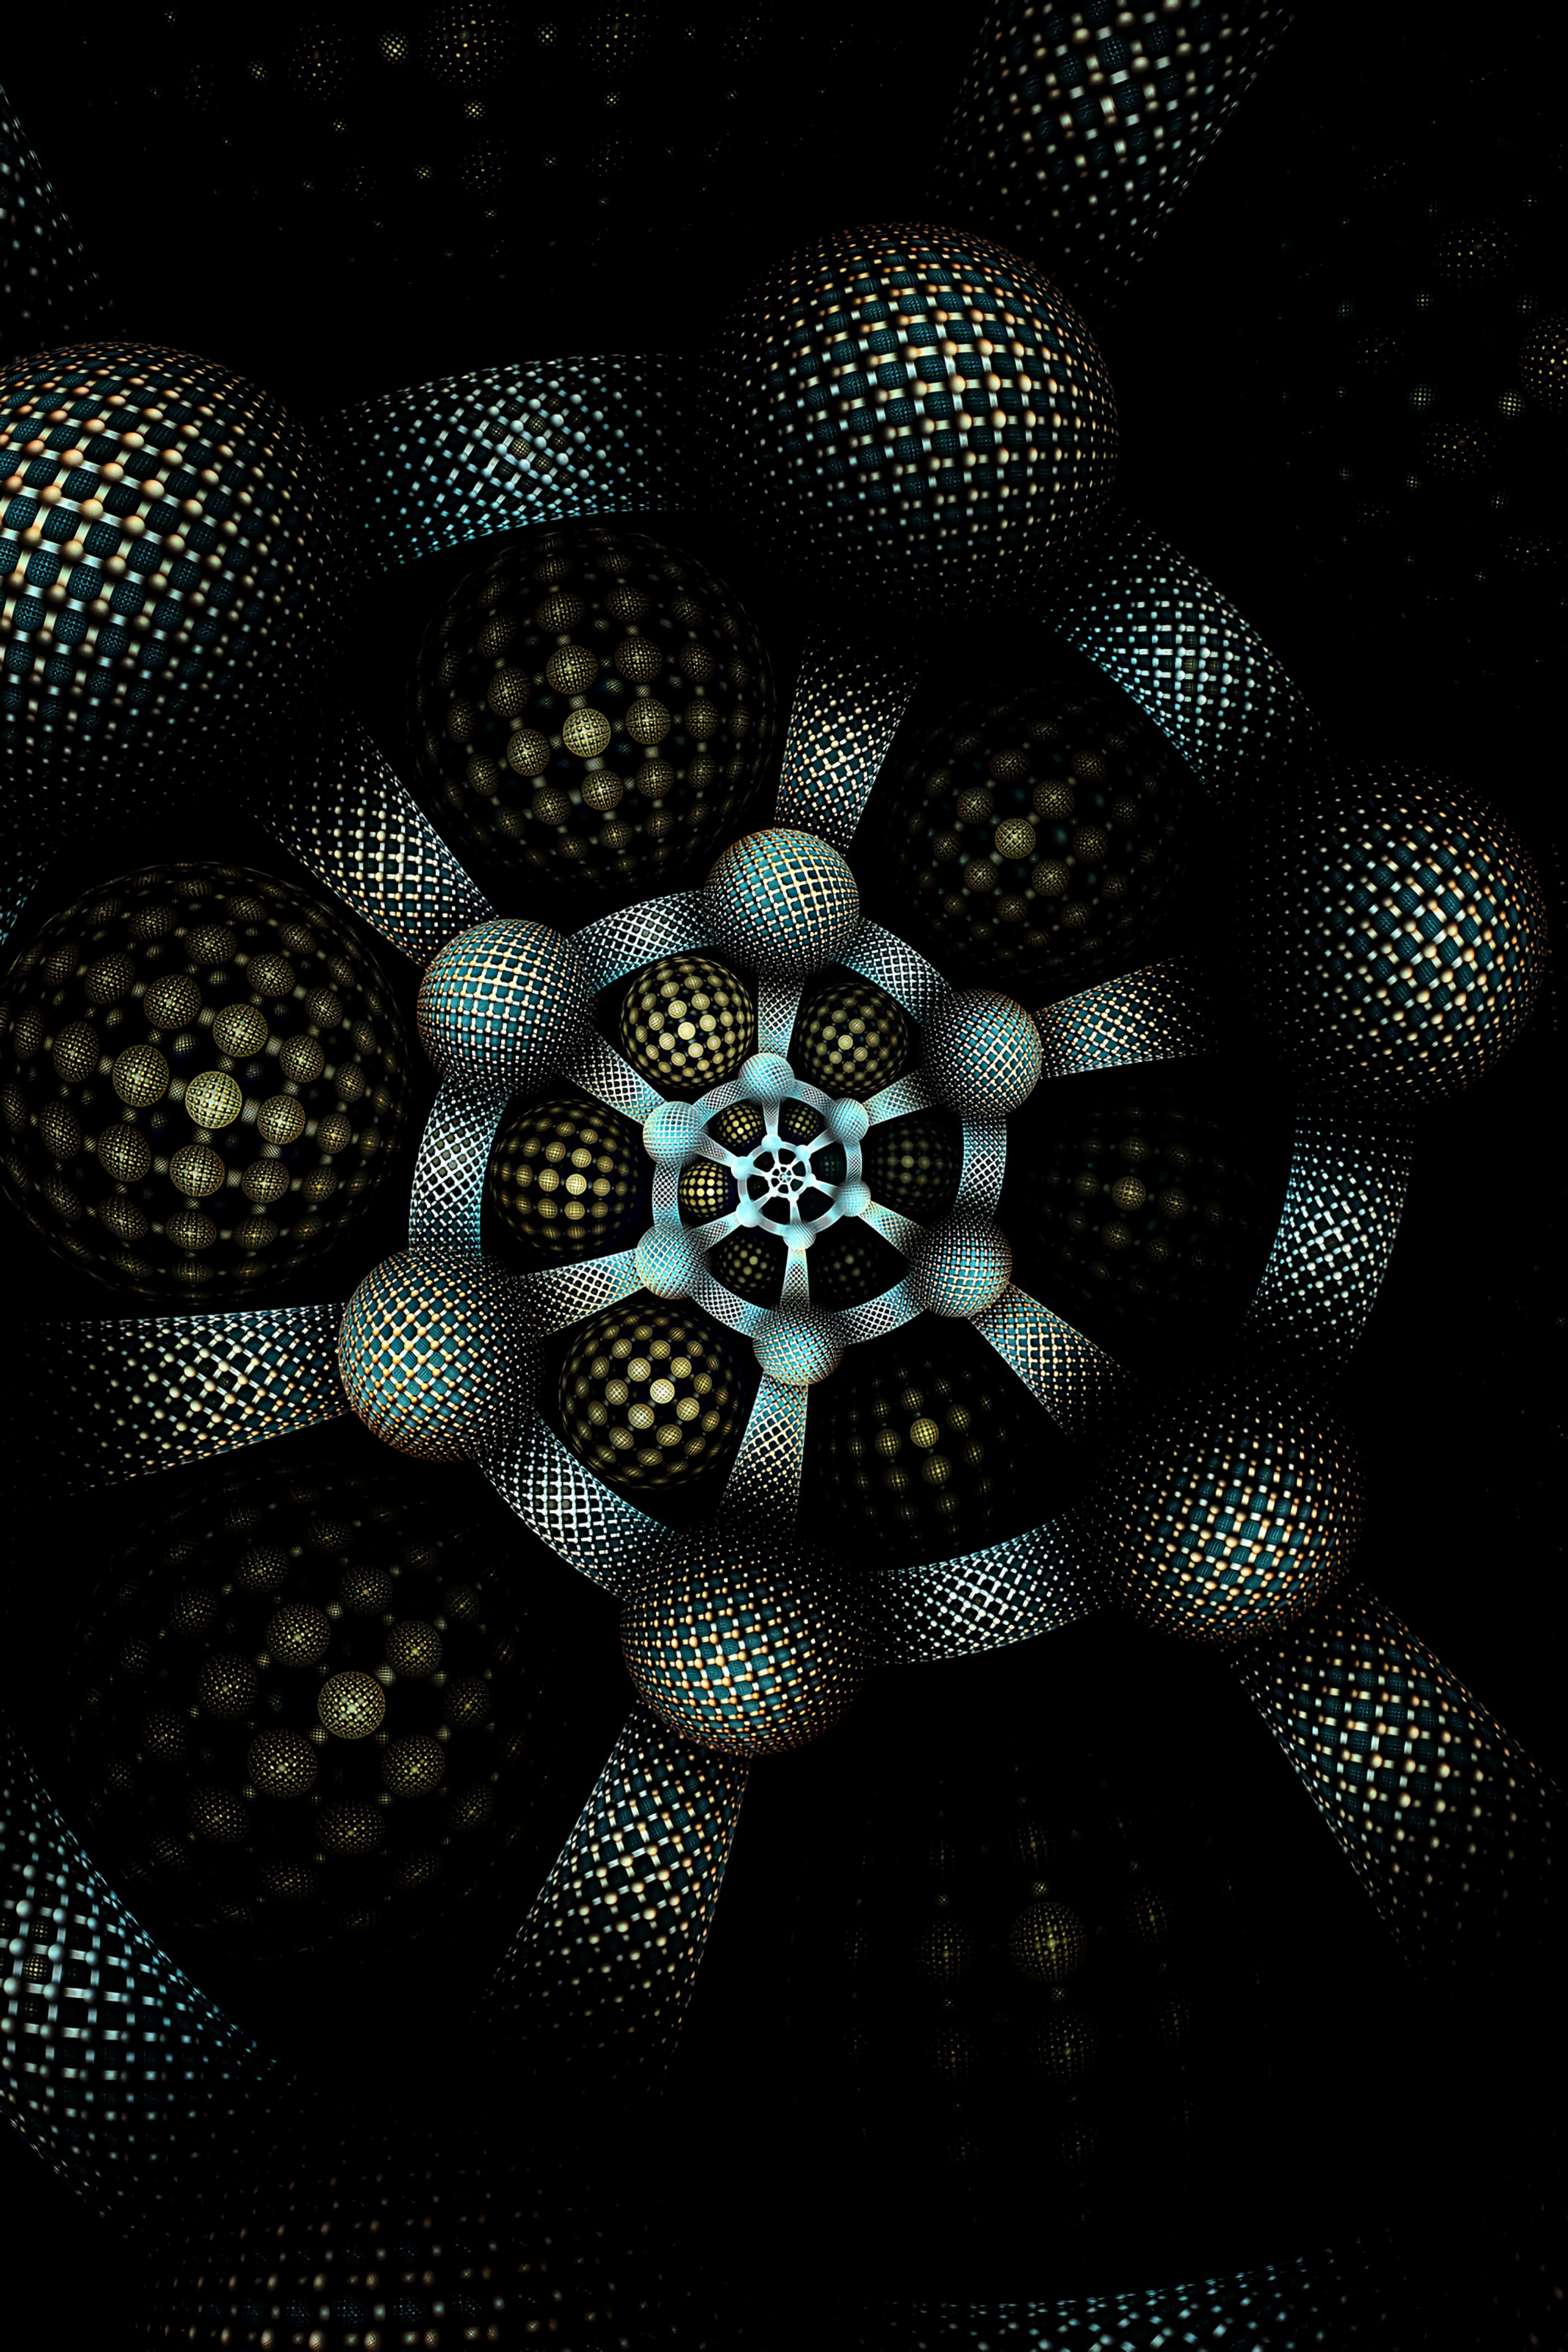 dark, form, circles, involute, abstract, pattern, fractal, swirling